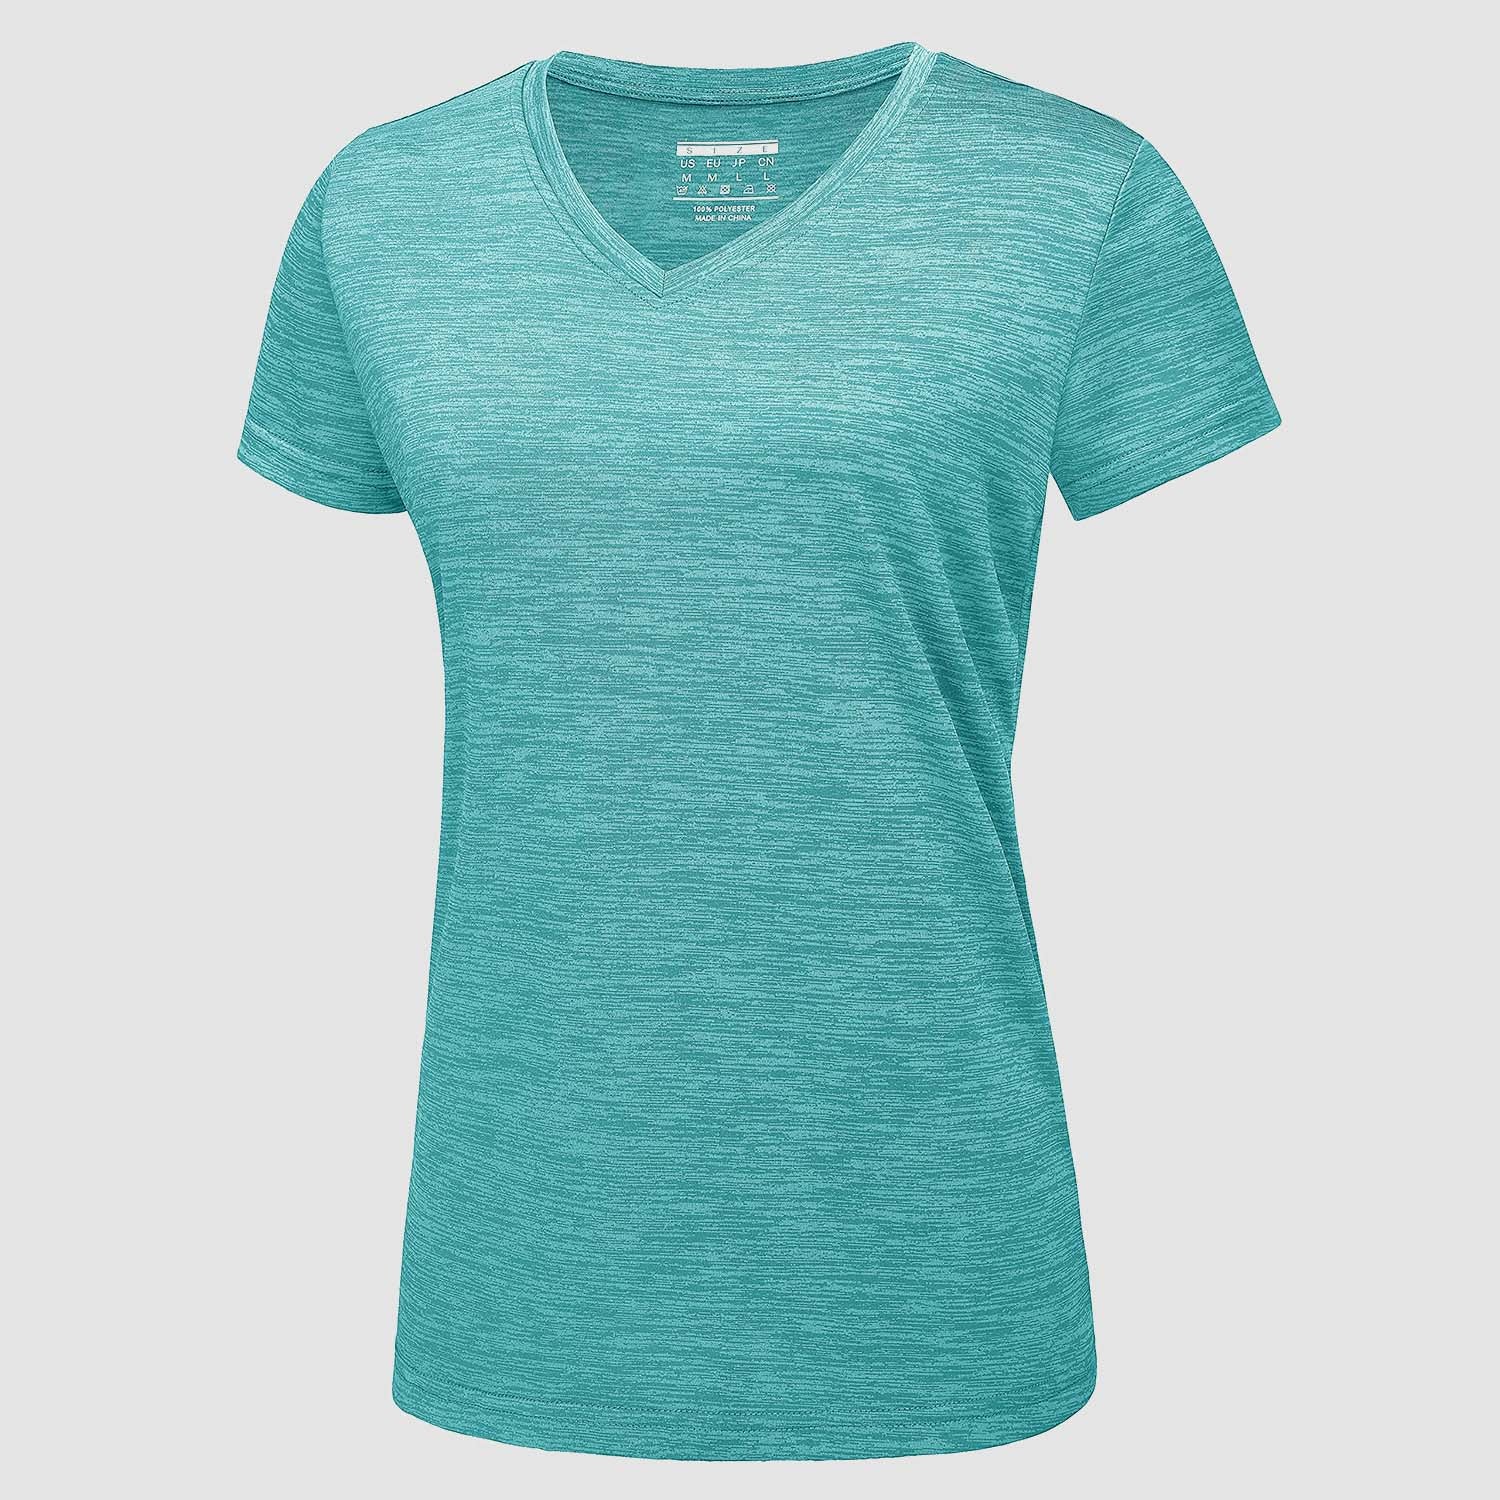 Women's V Neck T-shirt Moisture Wicking Yoga Shirts Quick Dry Athletic Top